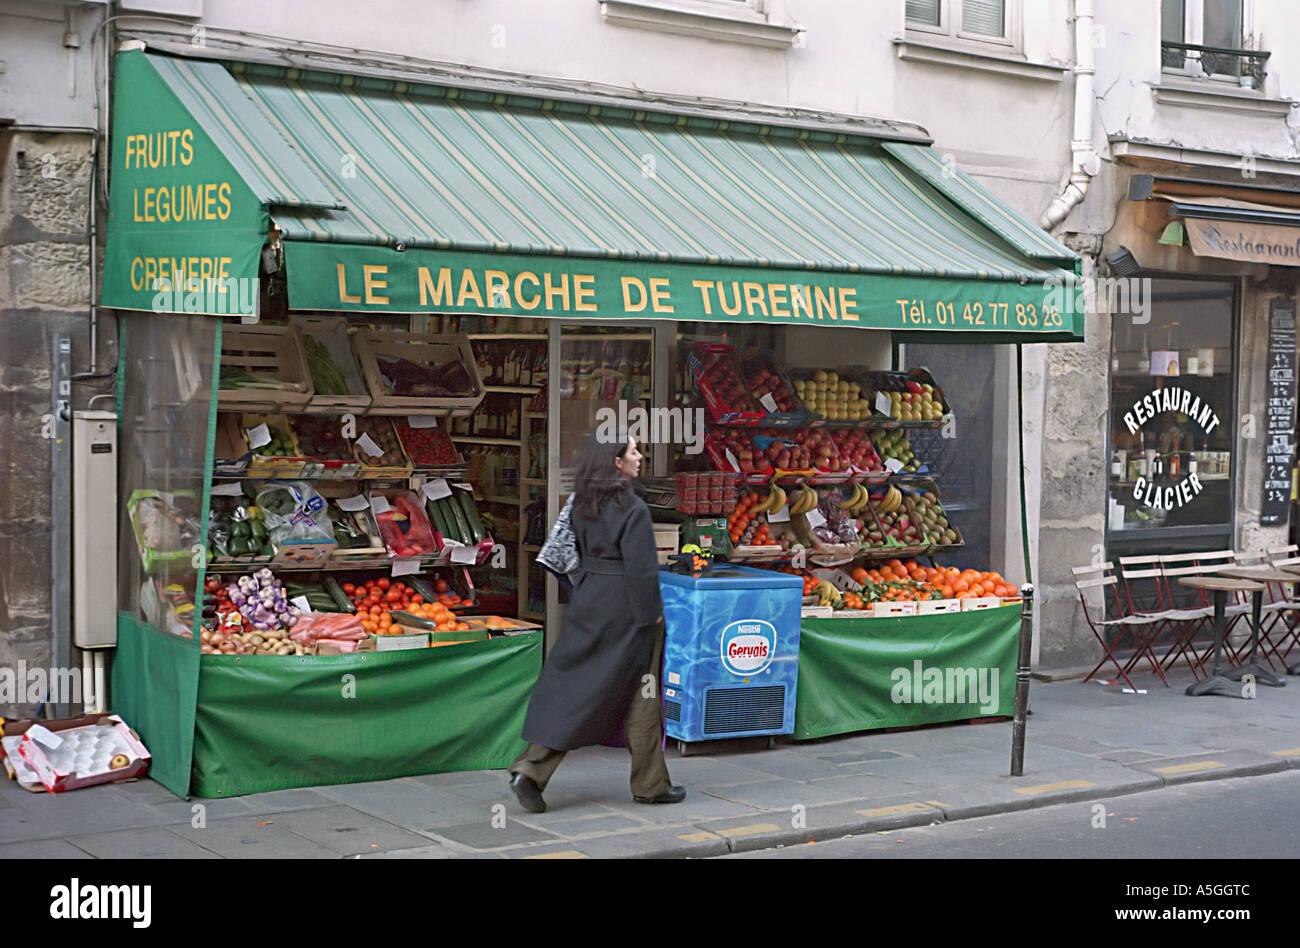 A typical French grocery store in Paris offering a sidewalk display of fruits and vegetables Stock Photo